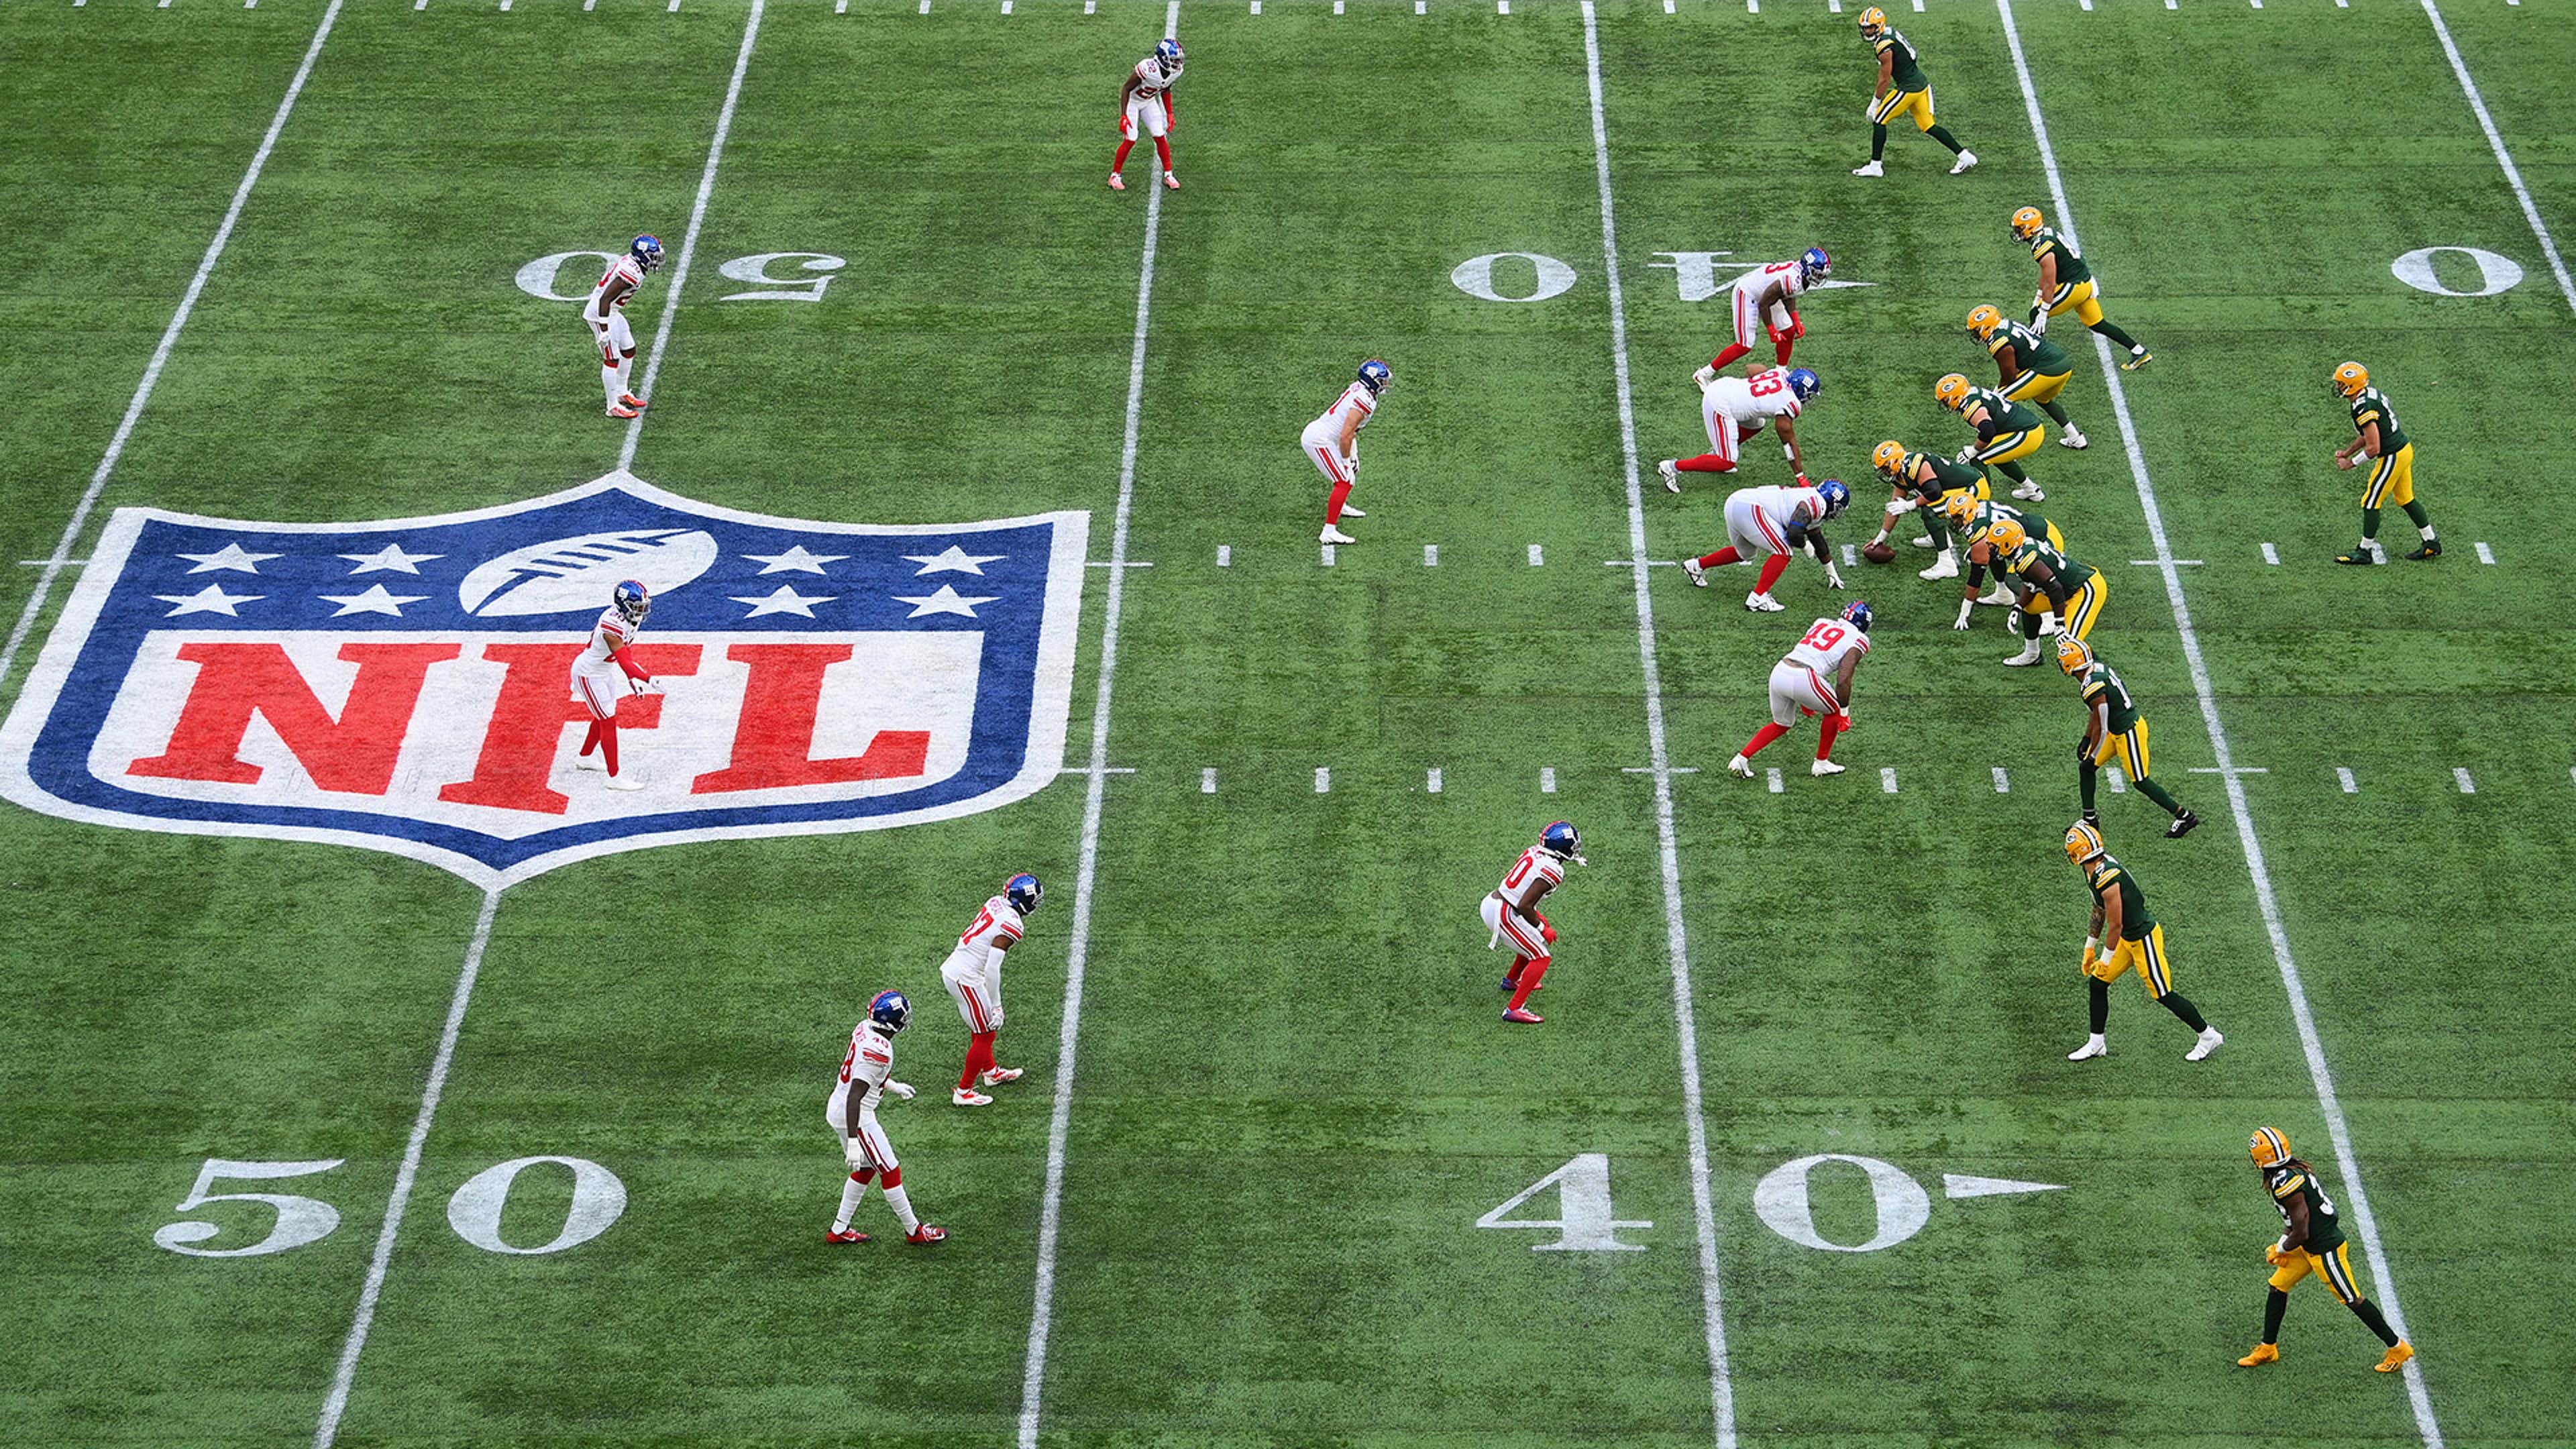 How To Watch NFL Games 2023